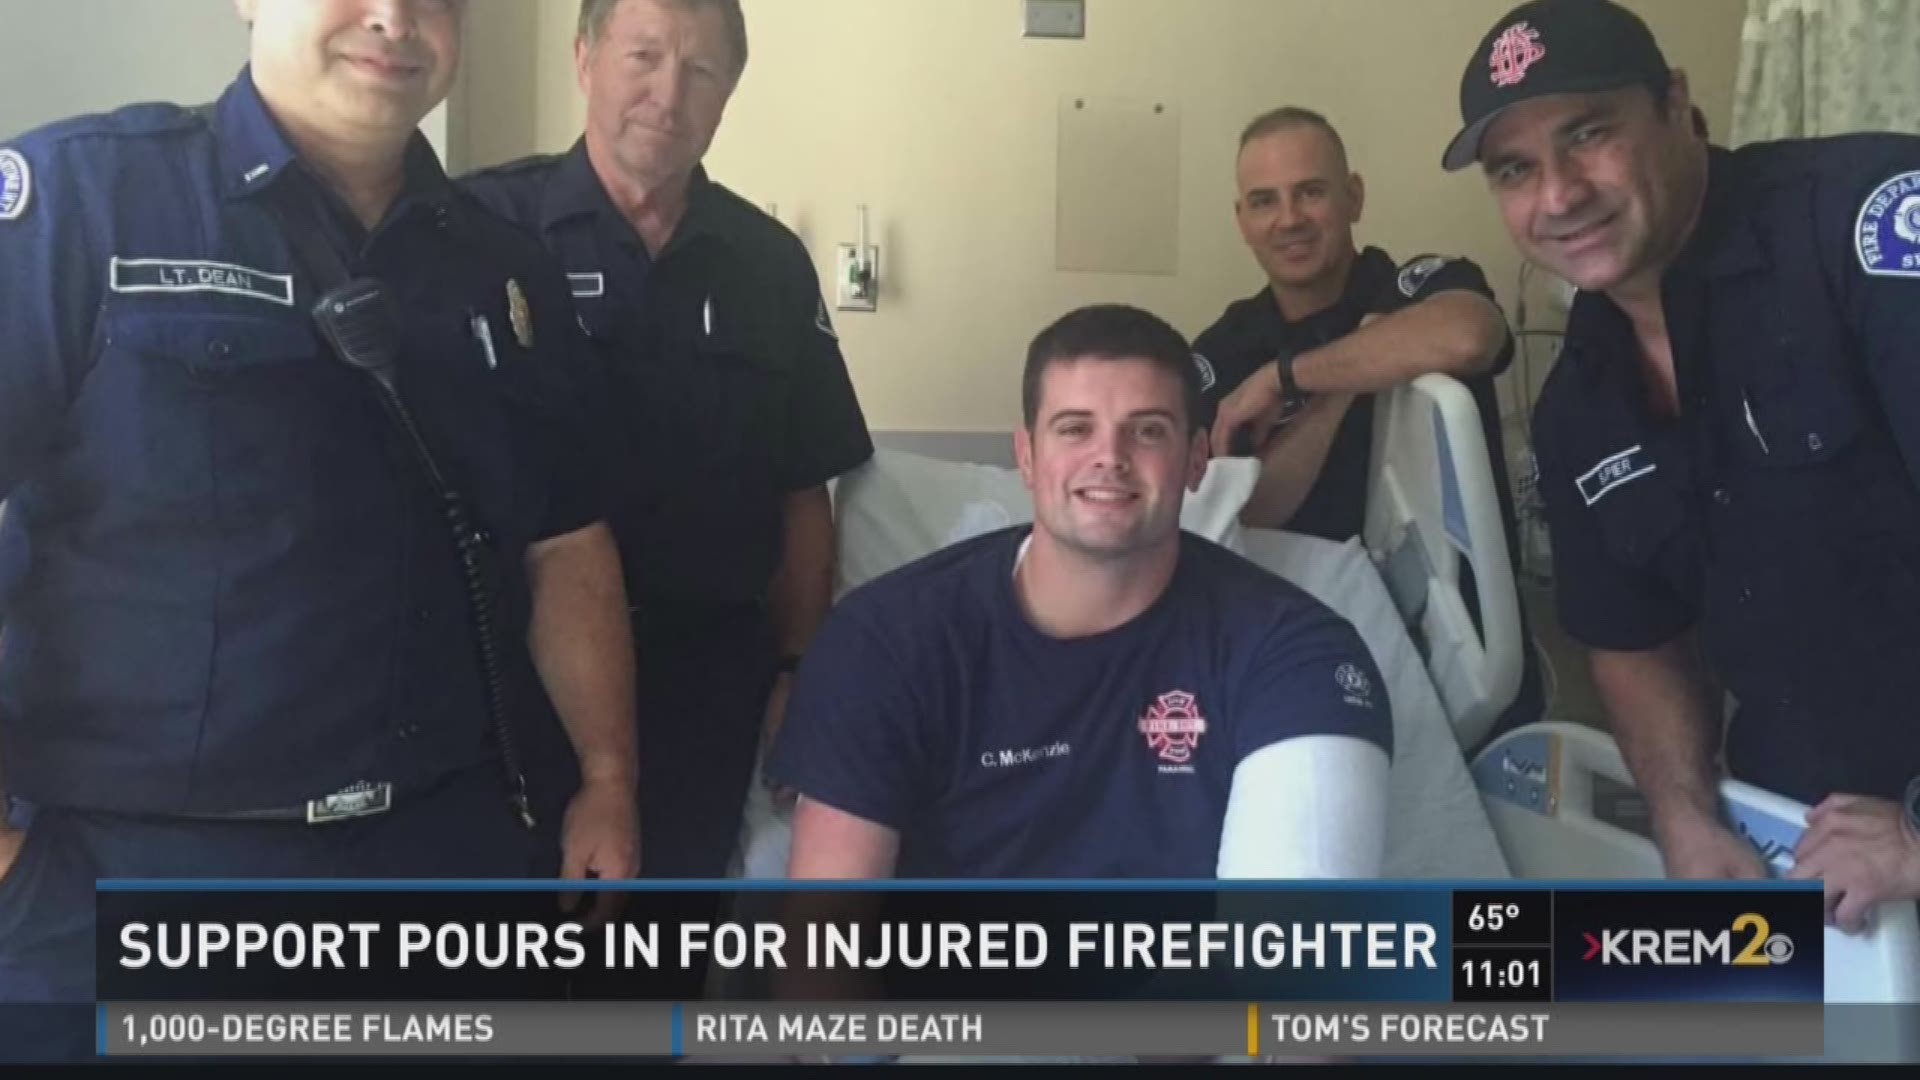 Support pours in for injured firefighter